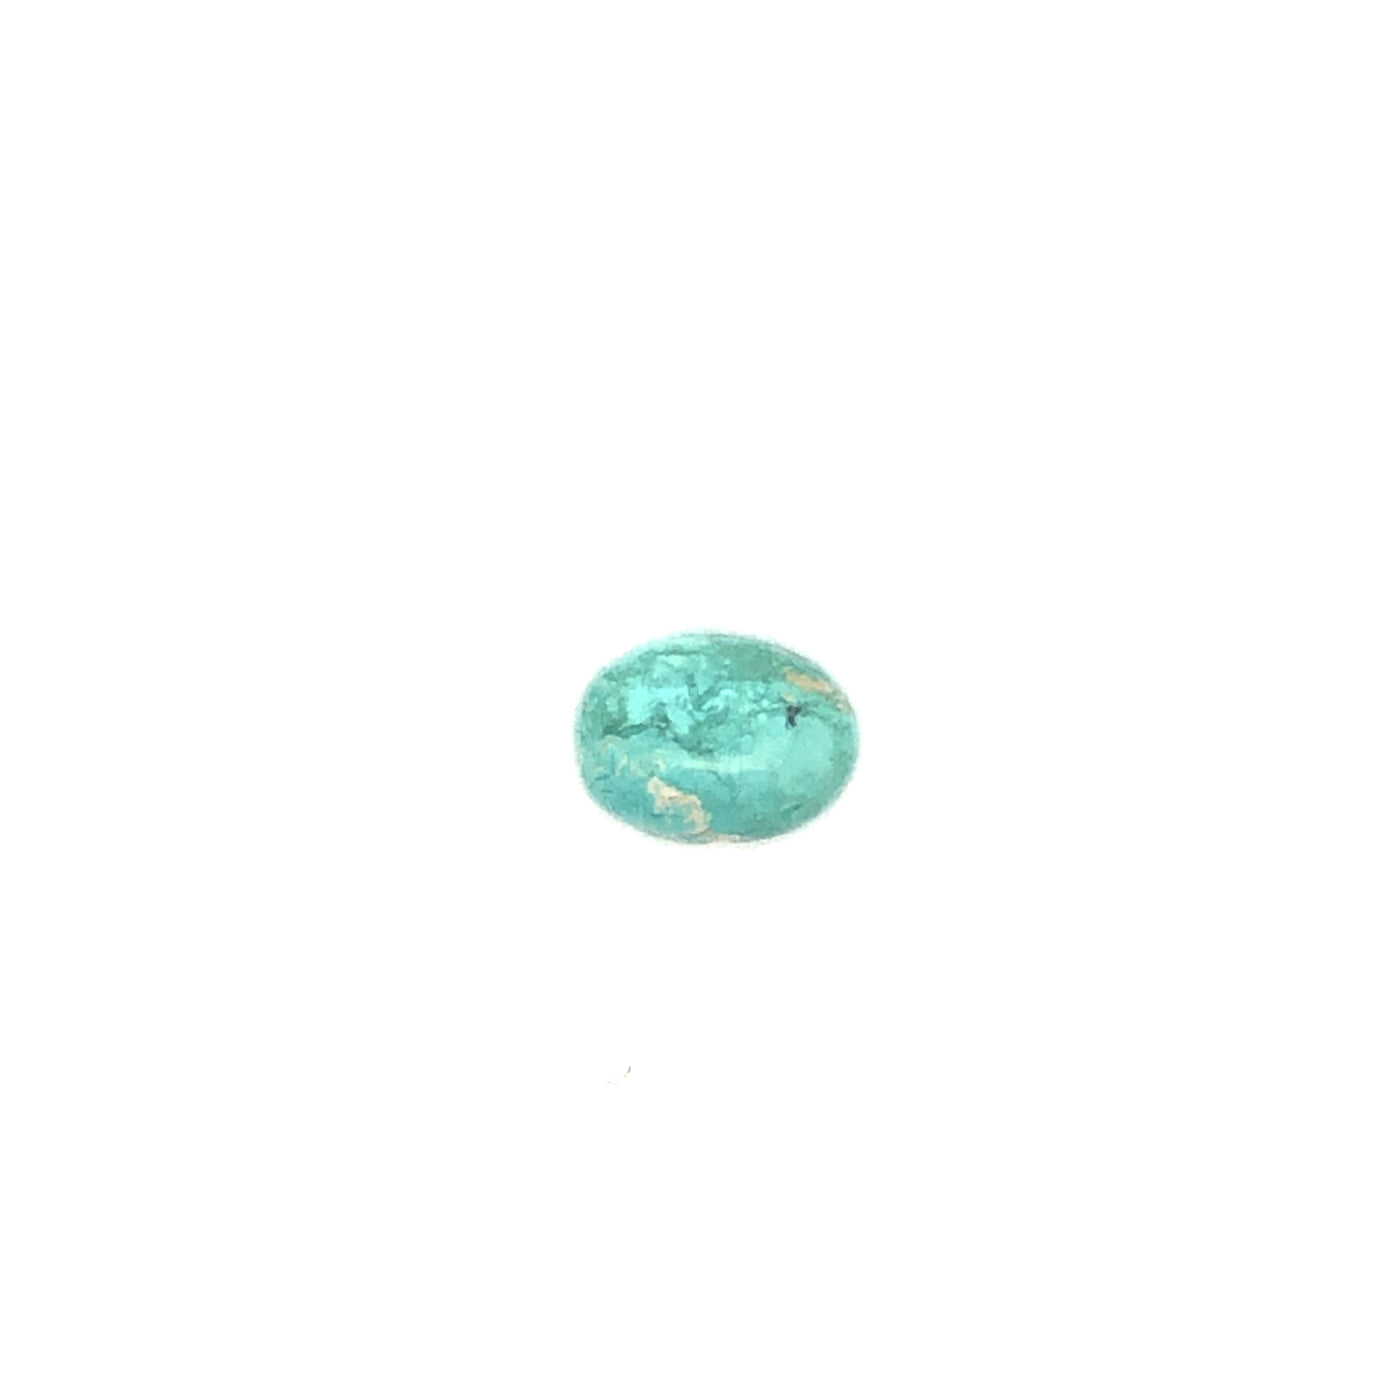 Loose Narooma Turquoise Oval Shaped 3.97Ct Blue With Some White